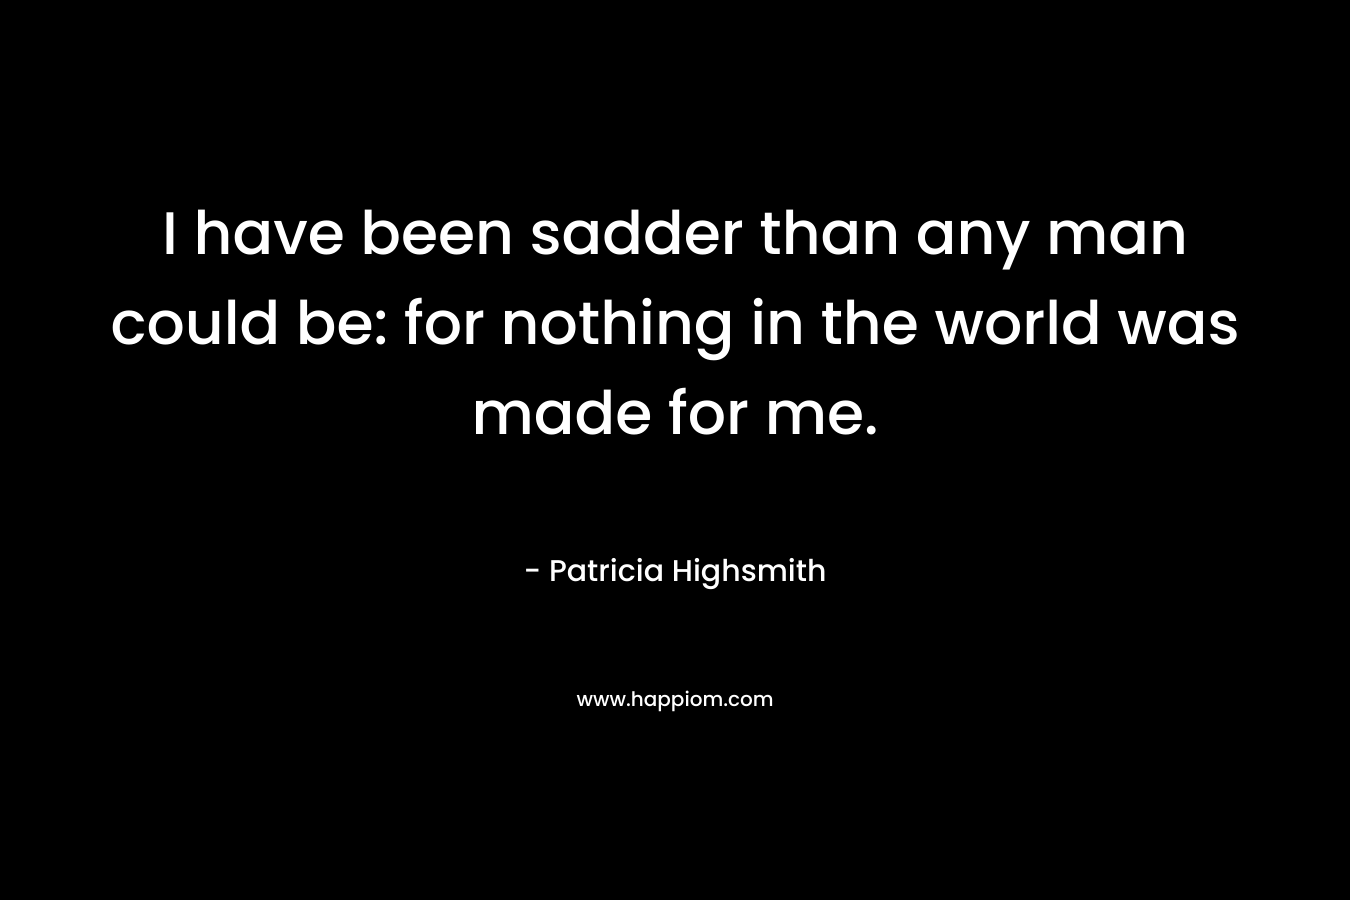 I have been sadder than any man could be: for nothing in the world was made for me.